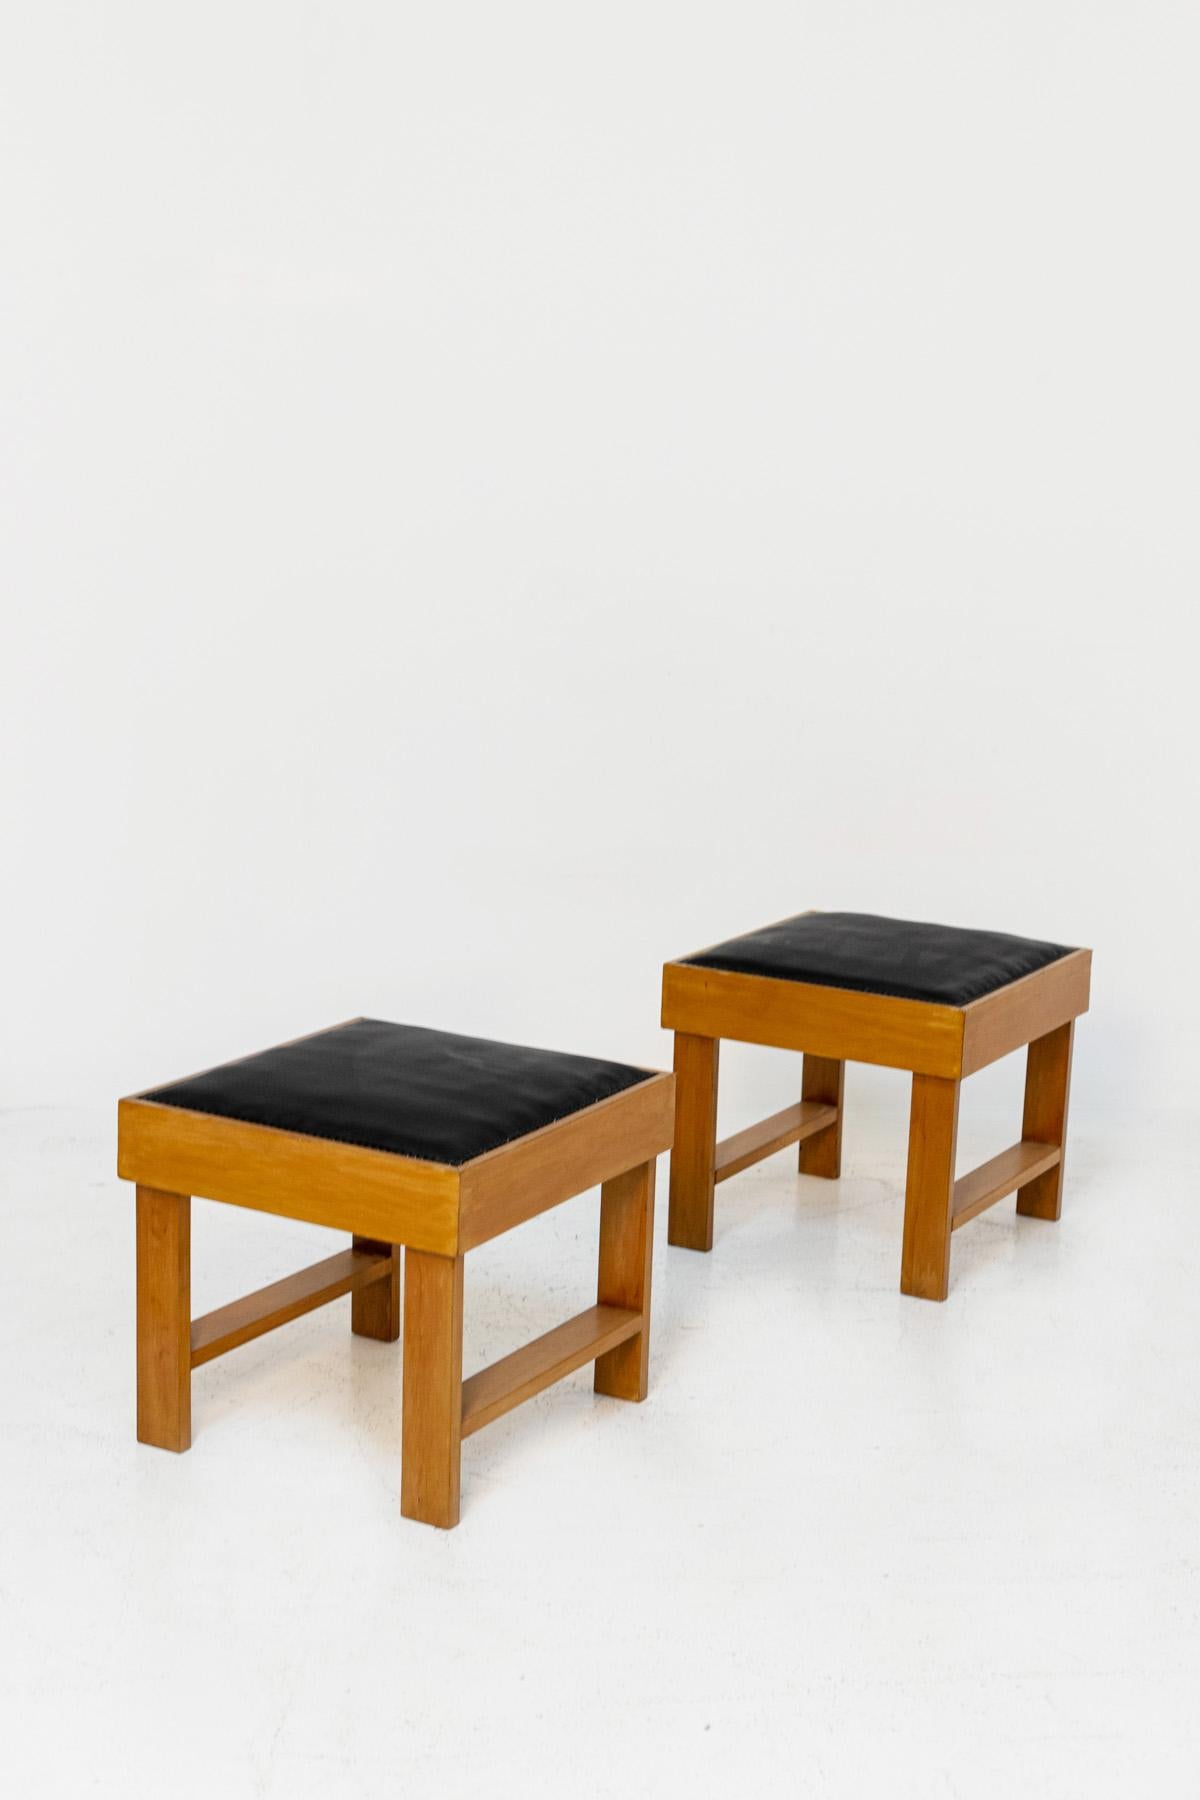 Pair of Italian Stools Attr. to BBPR in Wood and Black Leather 1